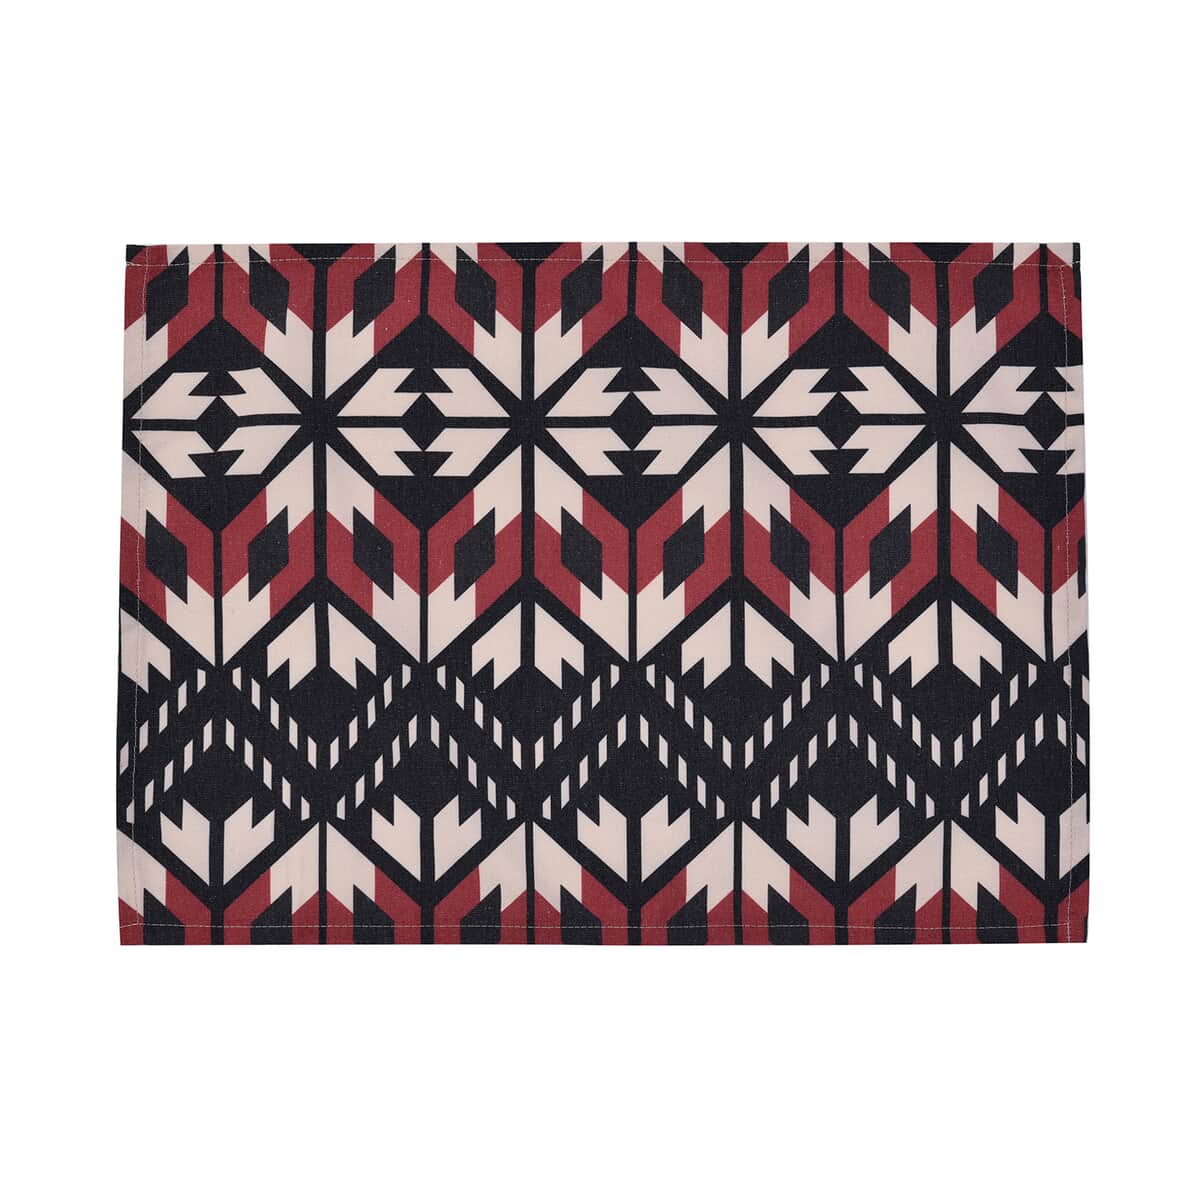 Homesmart Set of 4 Placemats and Table Runner - Geometric Pattern image number 3